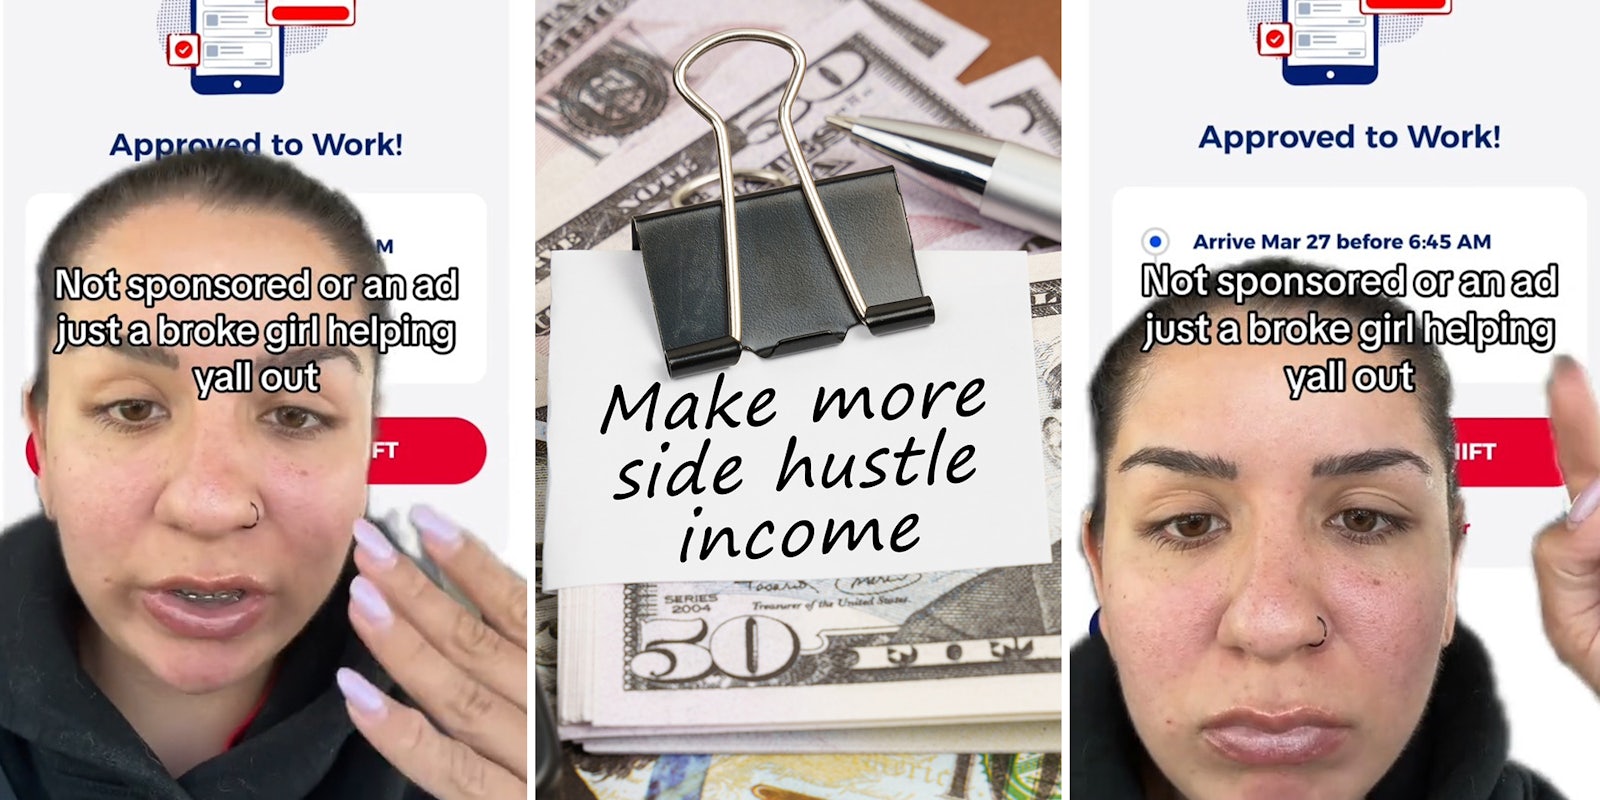 Jobseeker says she made $150 with this free side hustle app